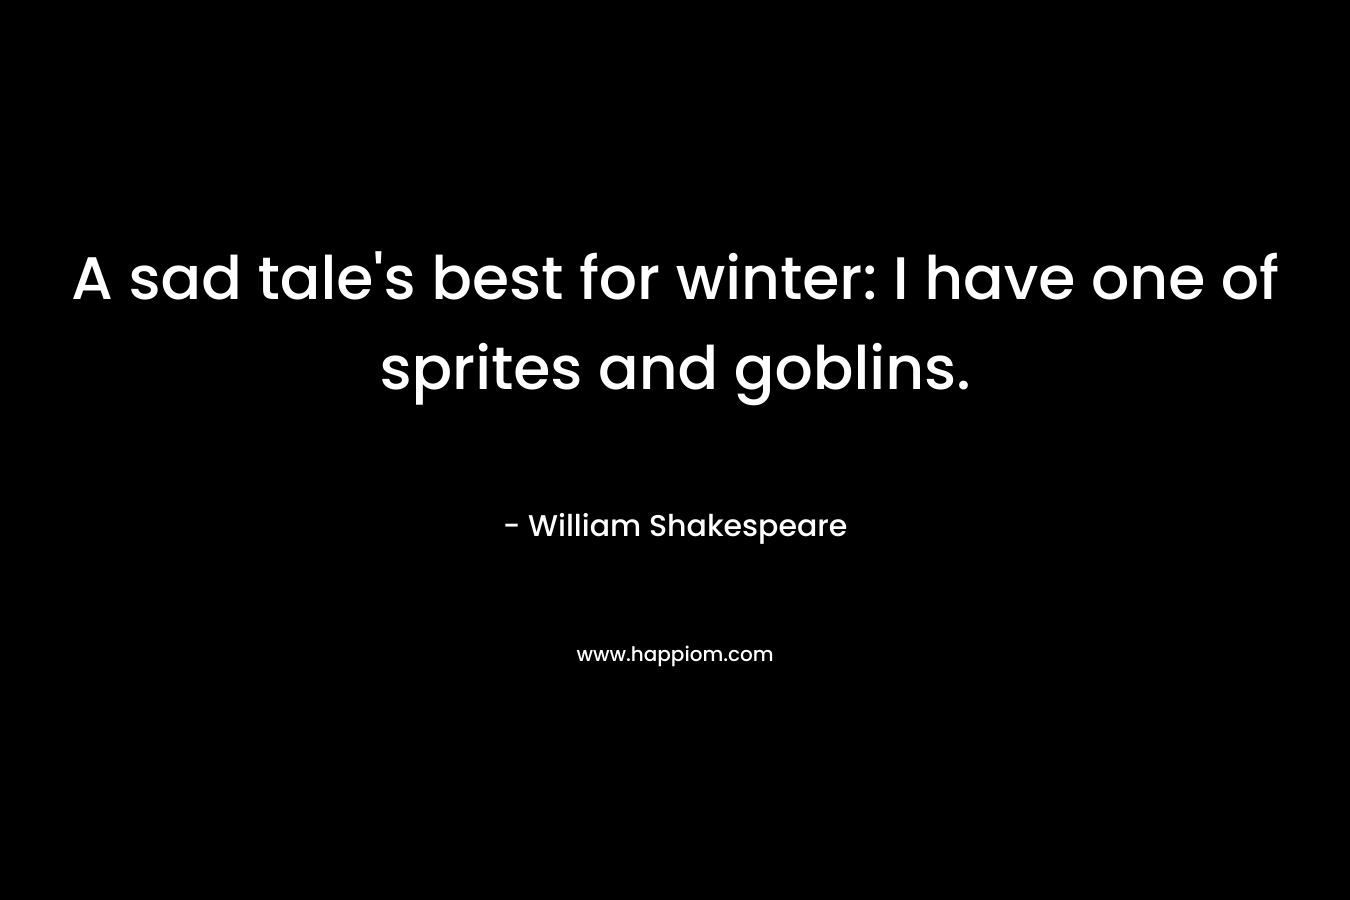 A sad tale’s best for winter: I have one of sprites and goblins. – William Shakespeare